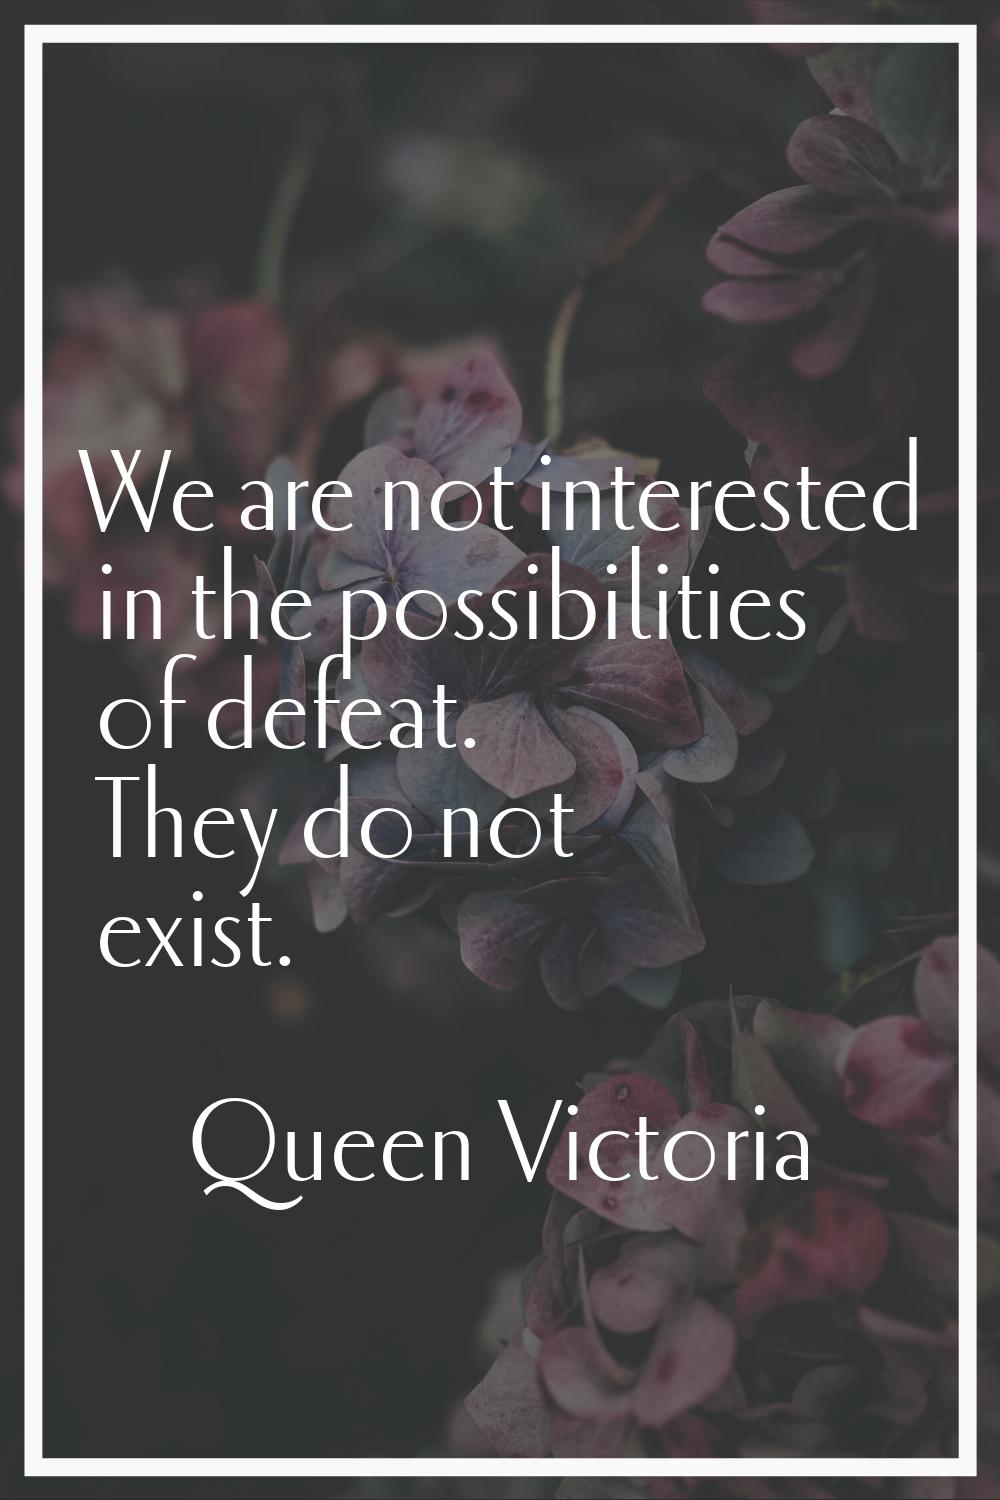 We are not interested in the possibilities of defeat. They do not exist.